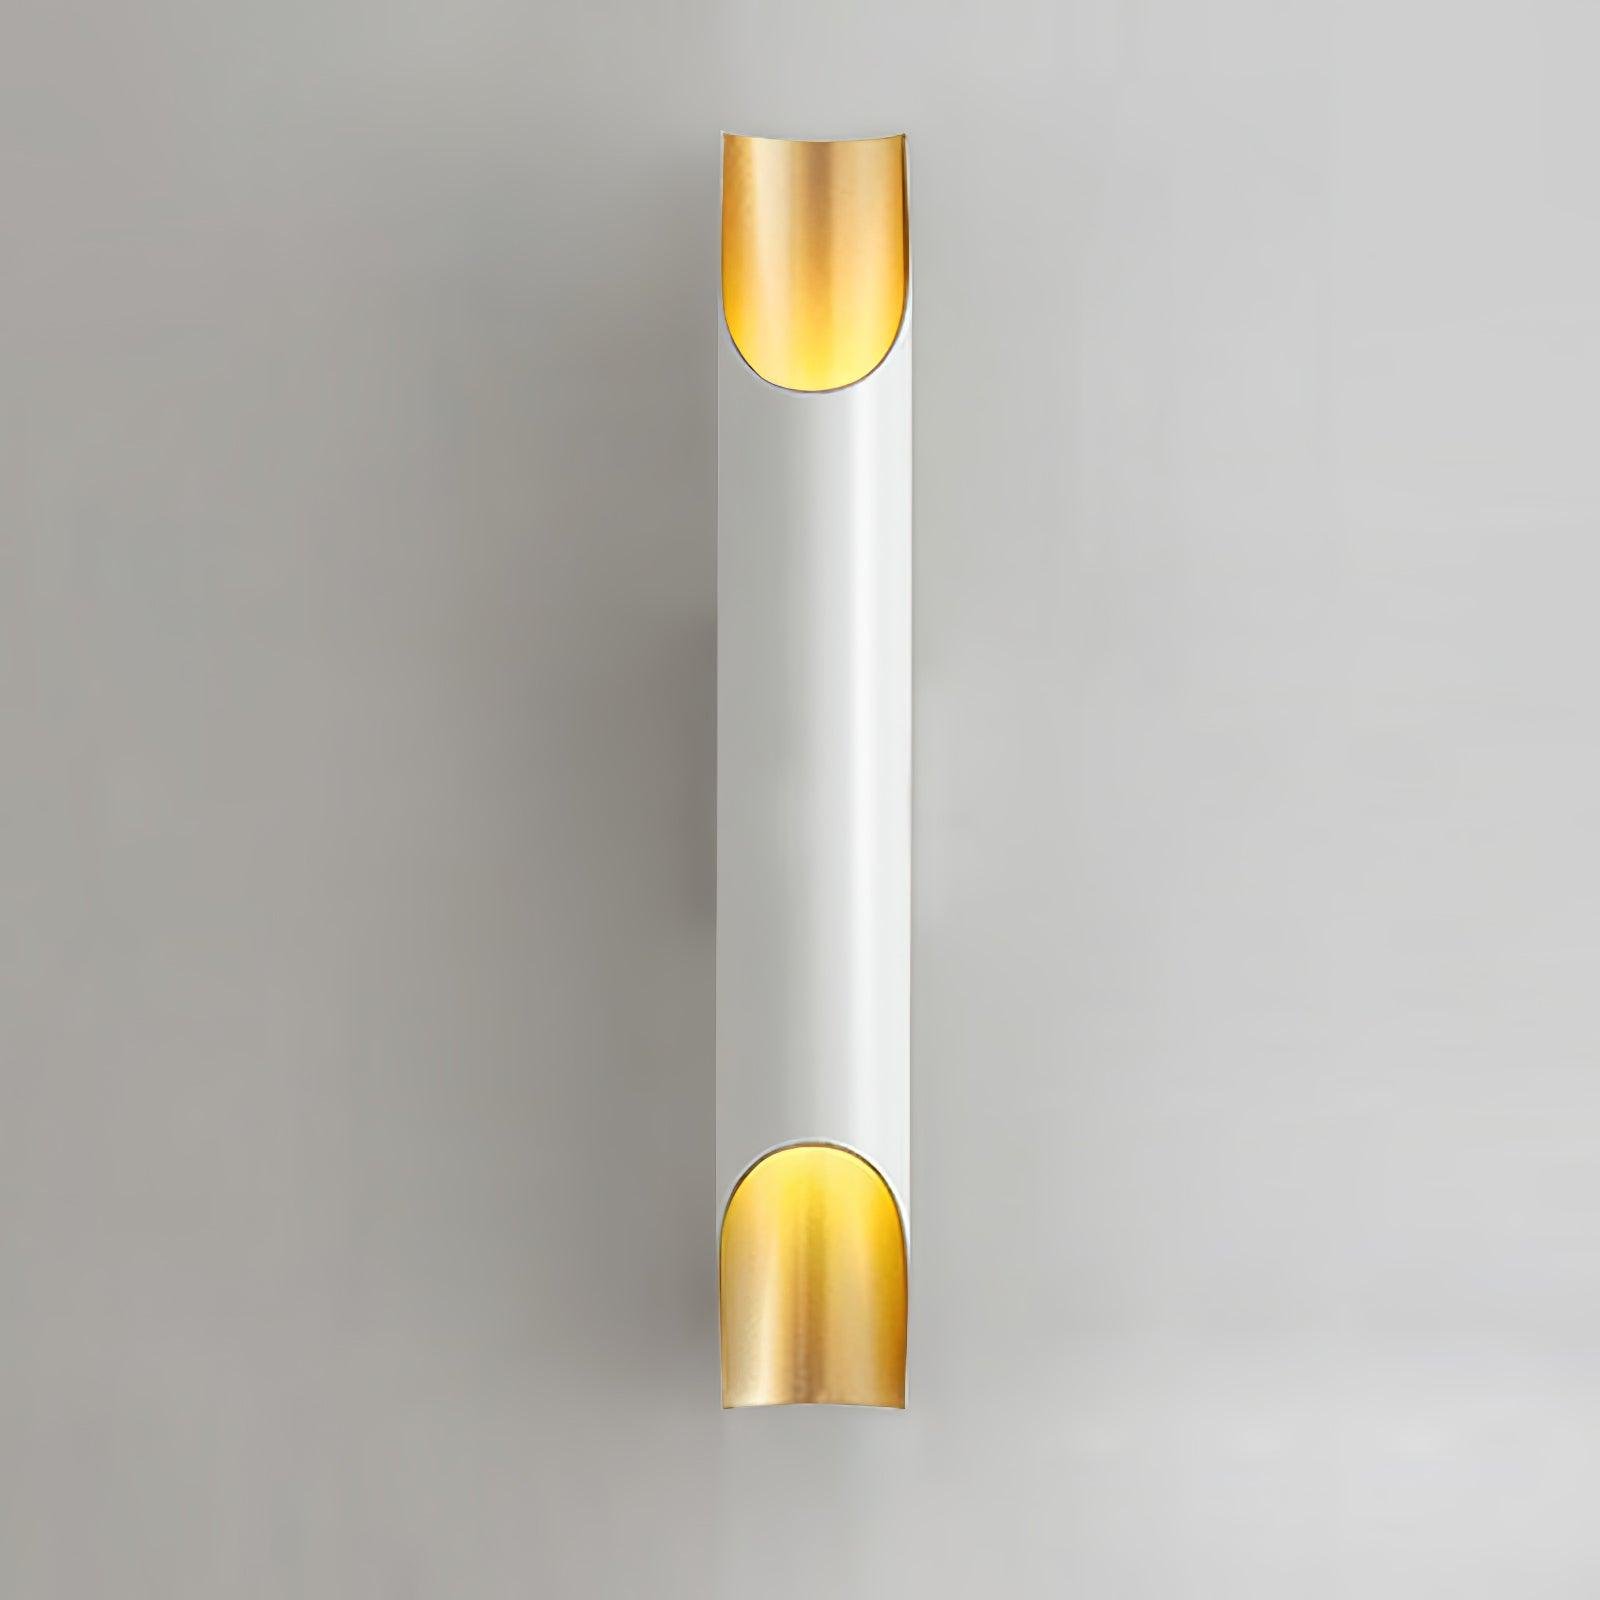 Set of 2 Abigali Straight Wall Lamps in White and Gold with a Size of 2.7 Inches in Diameter and 15.7 Inches in Height (6cm x 40cm)